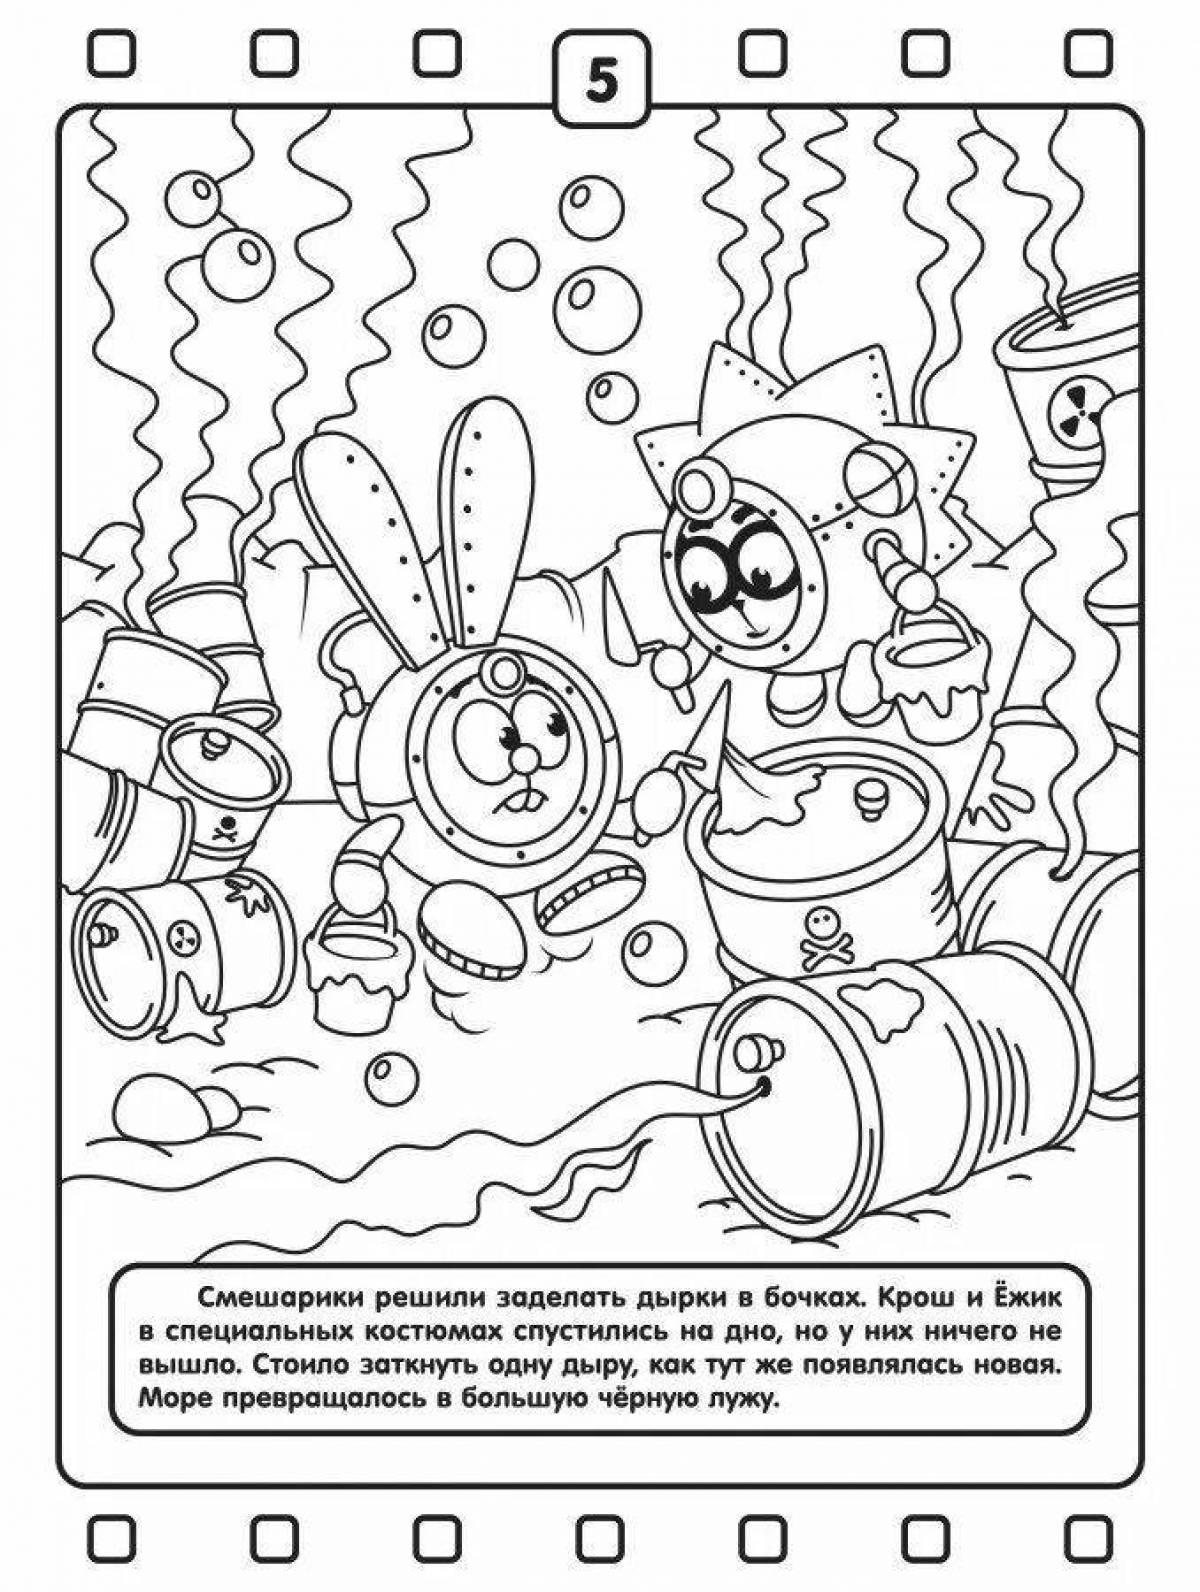 Exquisite iron nanny coloring page